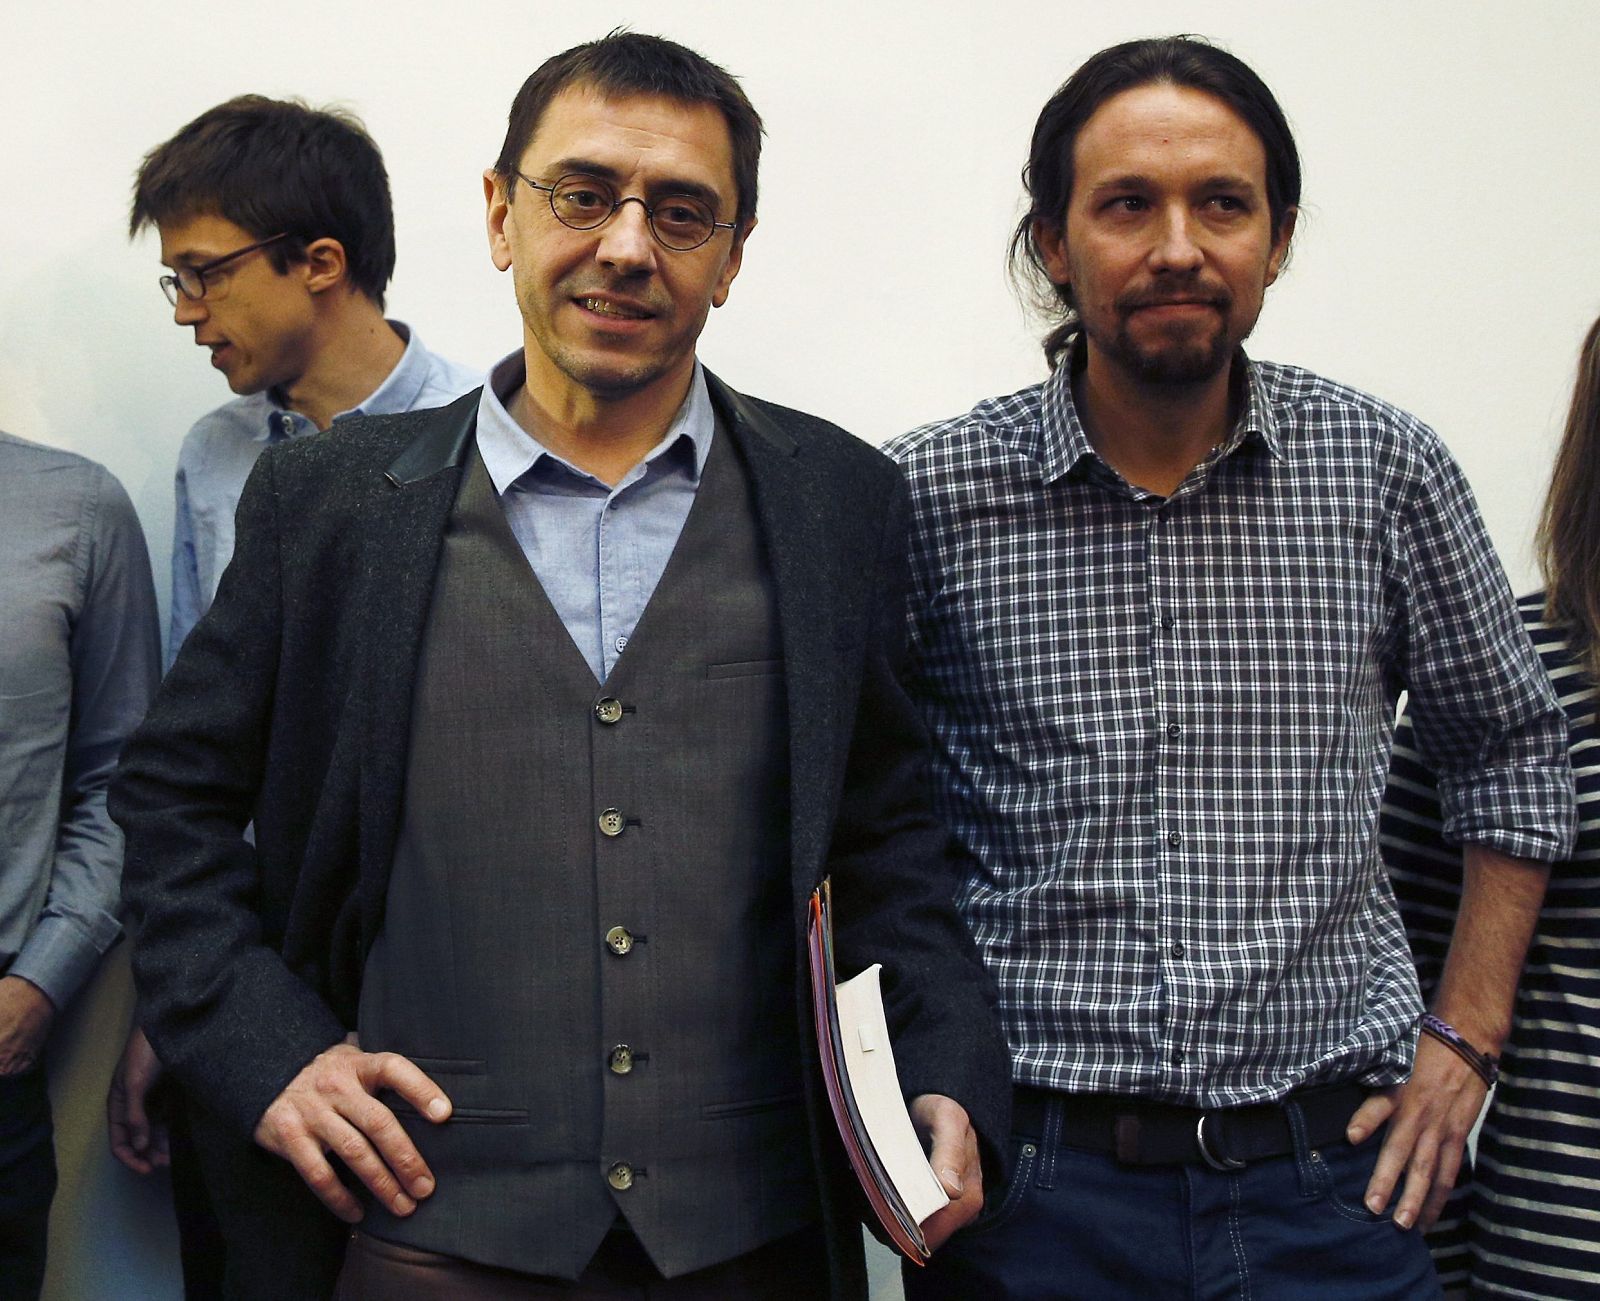 Monedero stands next to Iglesias before a news conference in Madrid